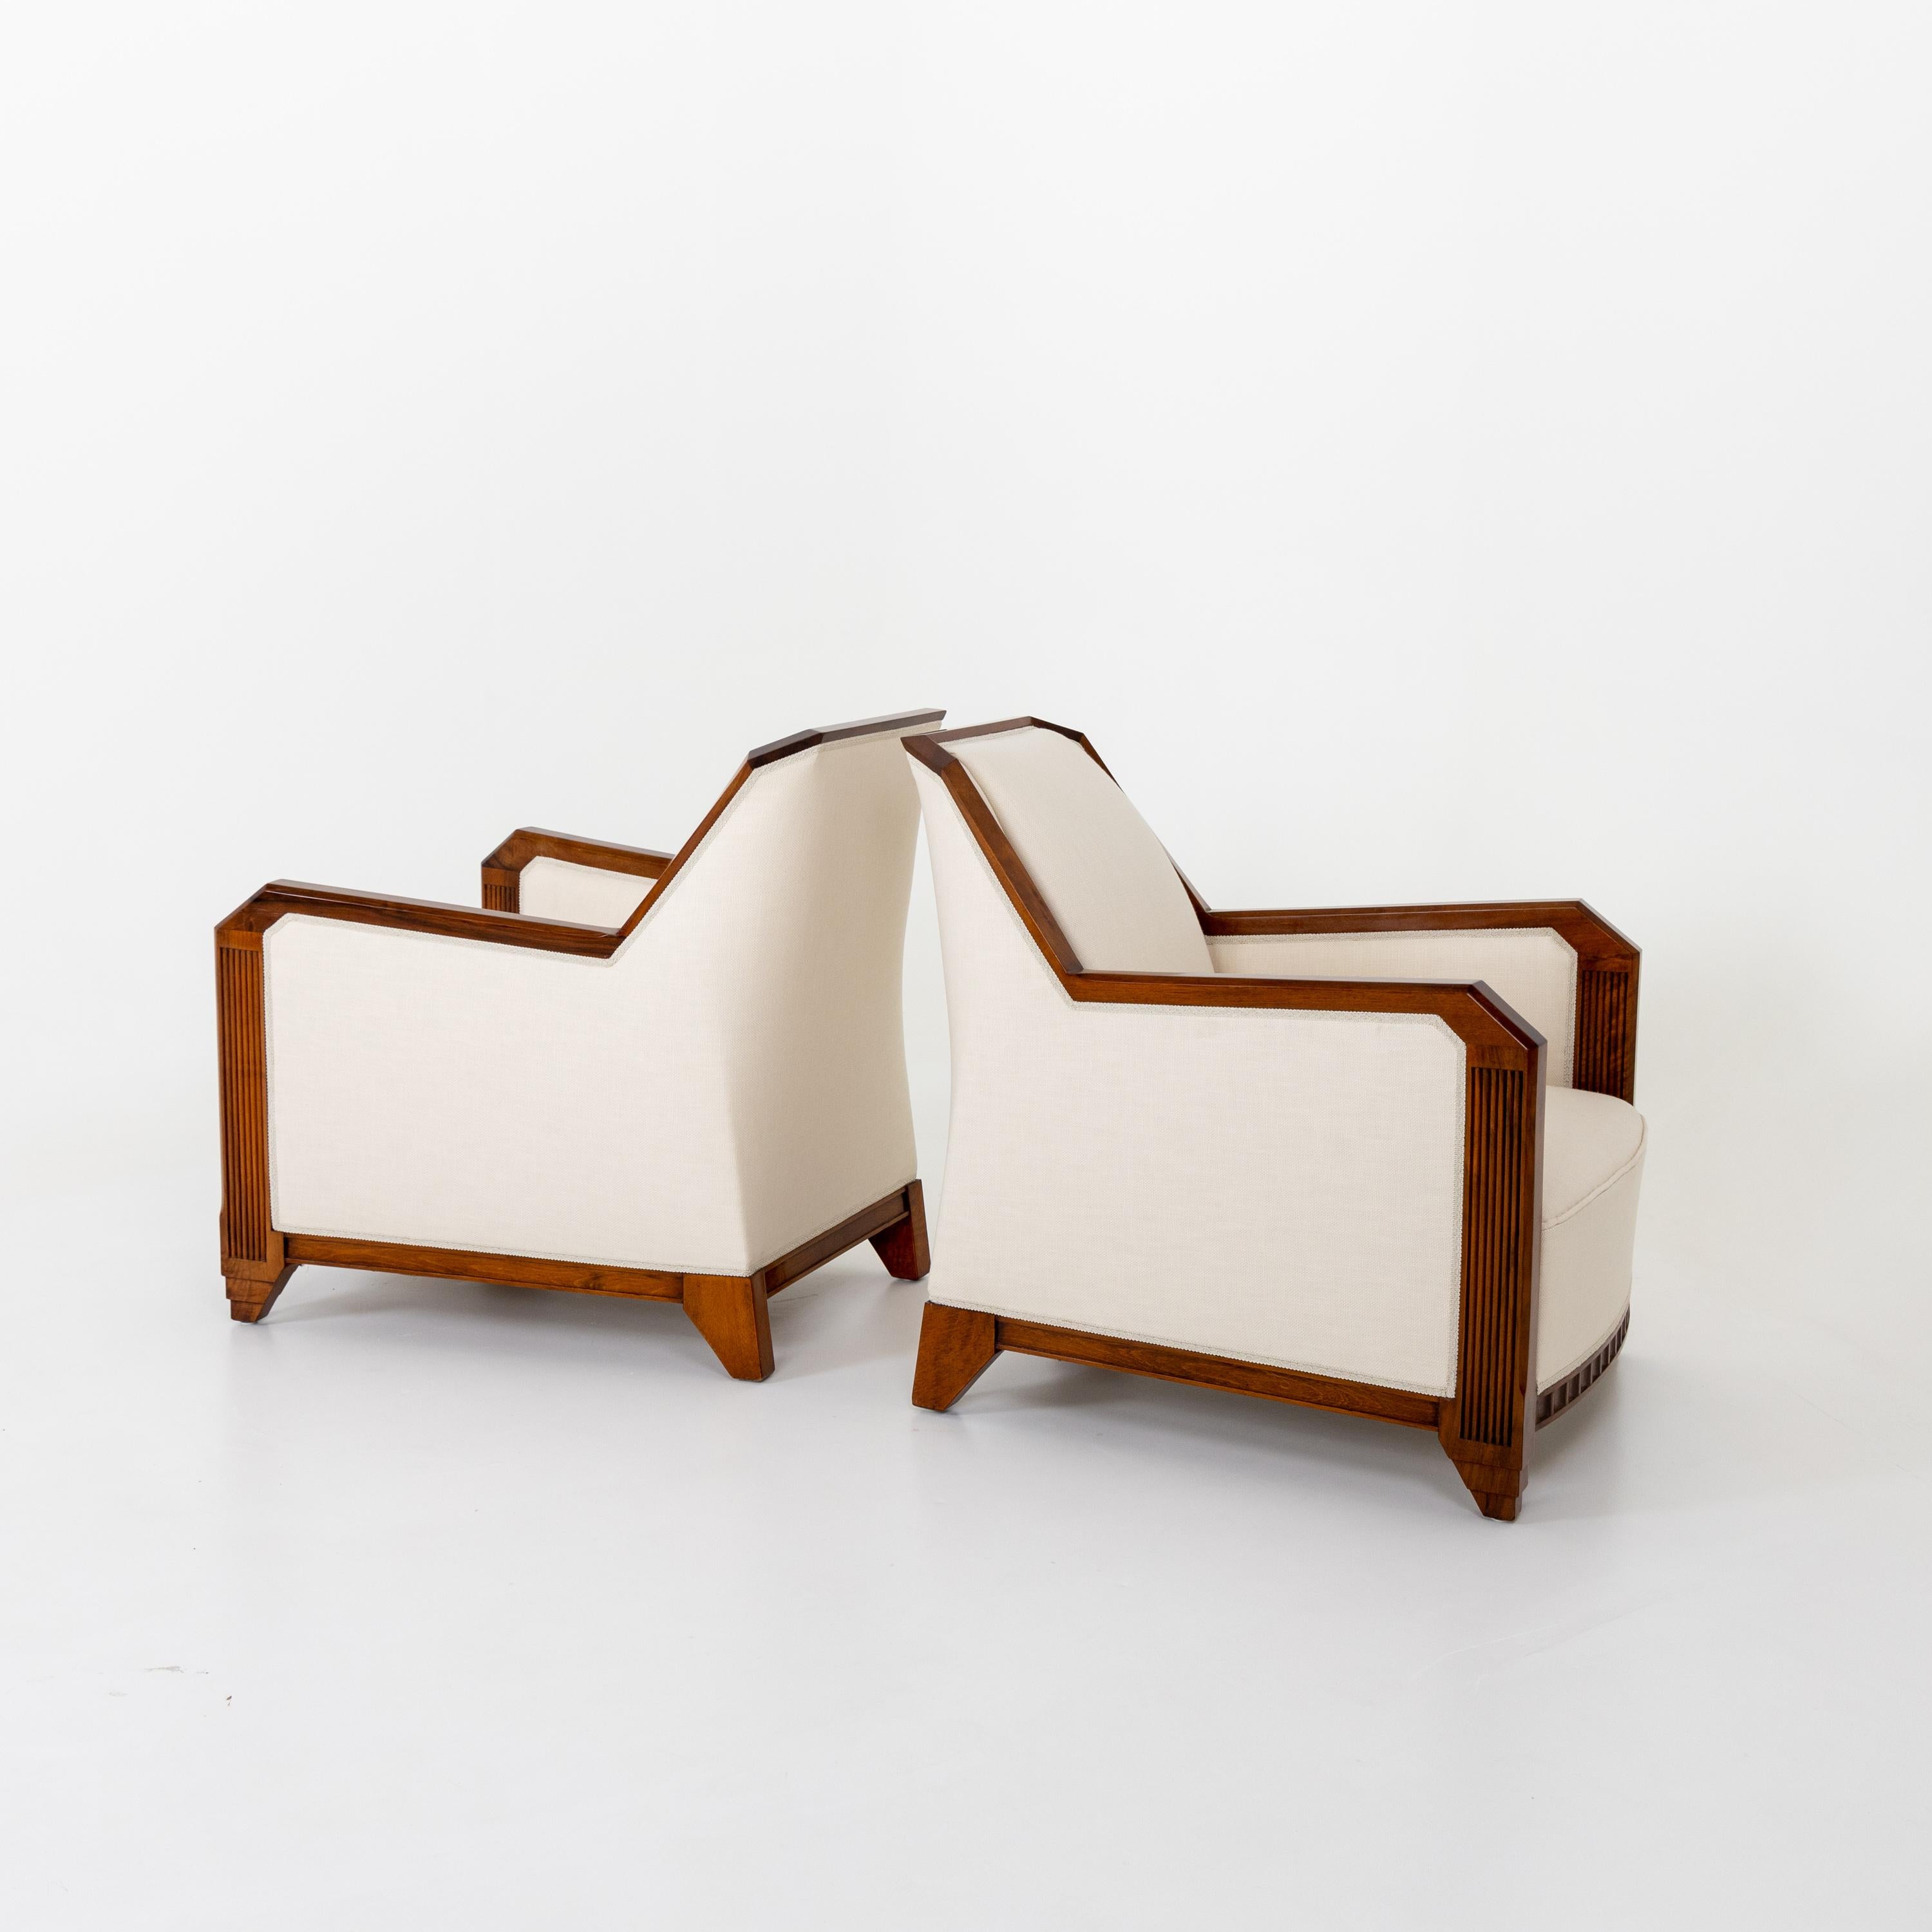 Mid-20th Century Pair of Art Deco Club Chairs